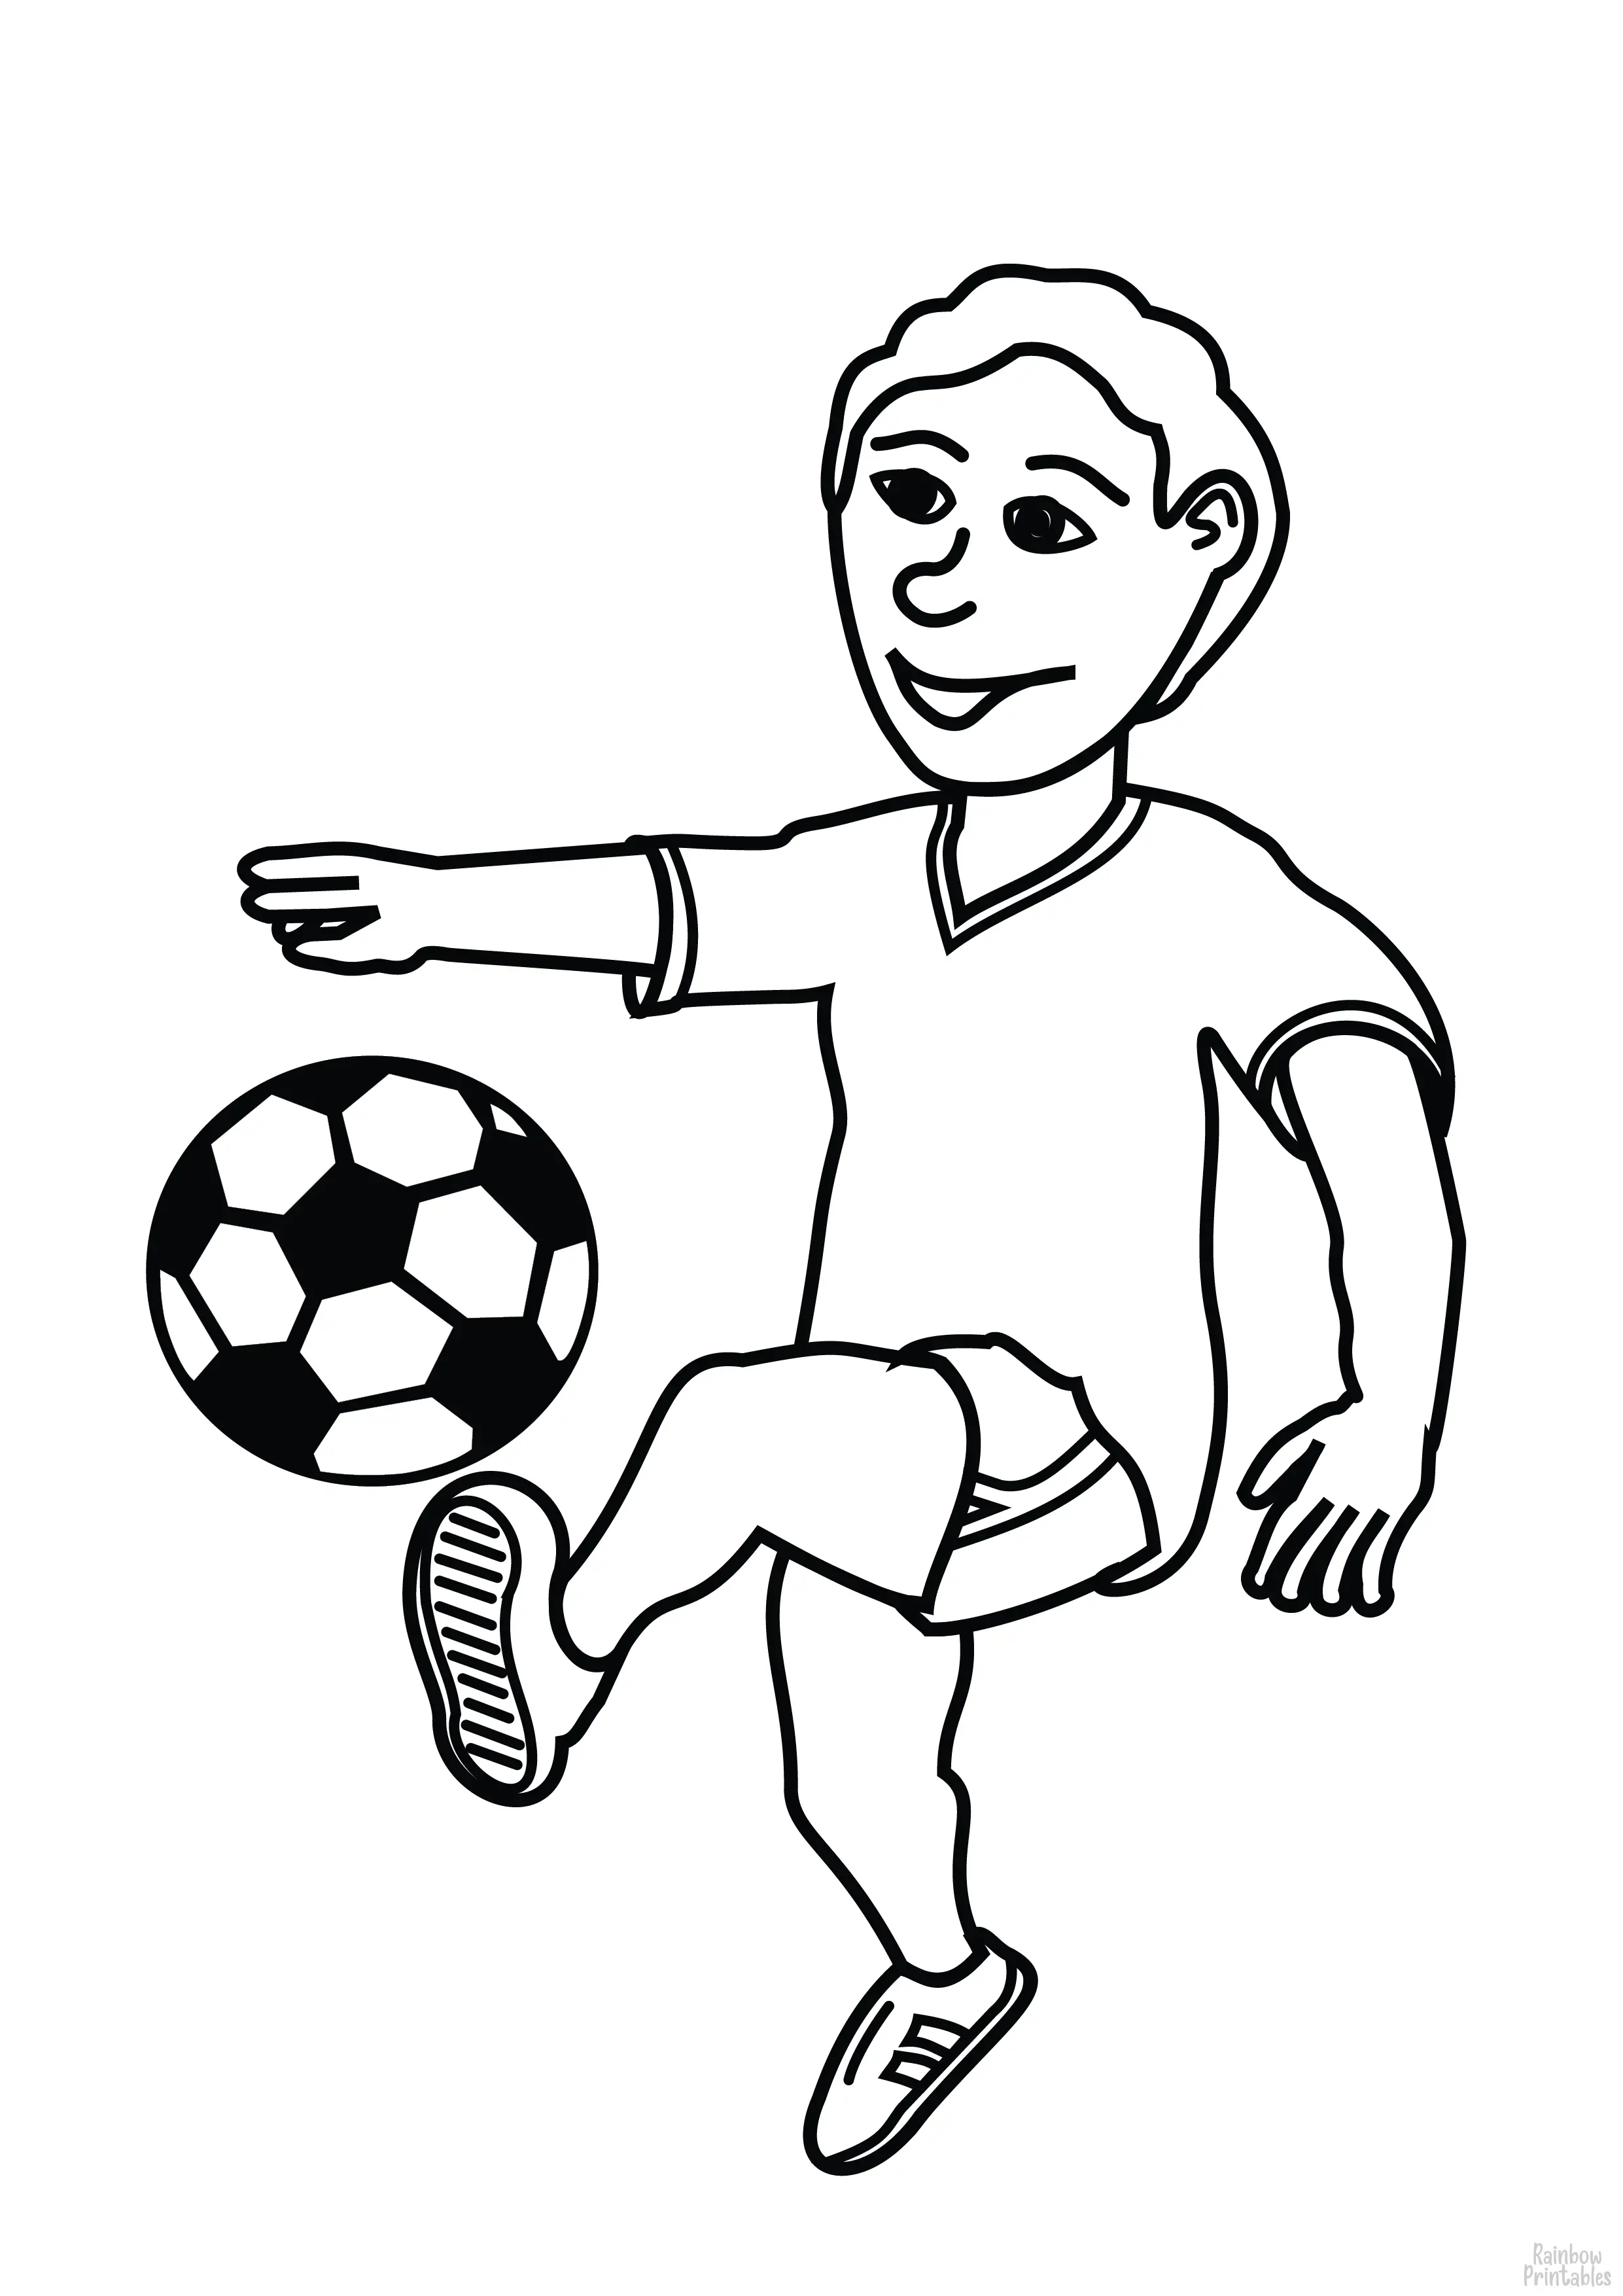 SOCCER Player Free Clipart Coloring Pages for Kids Adults Art Activities Line Art